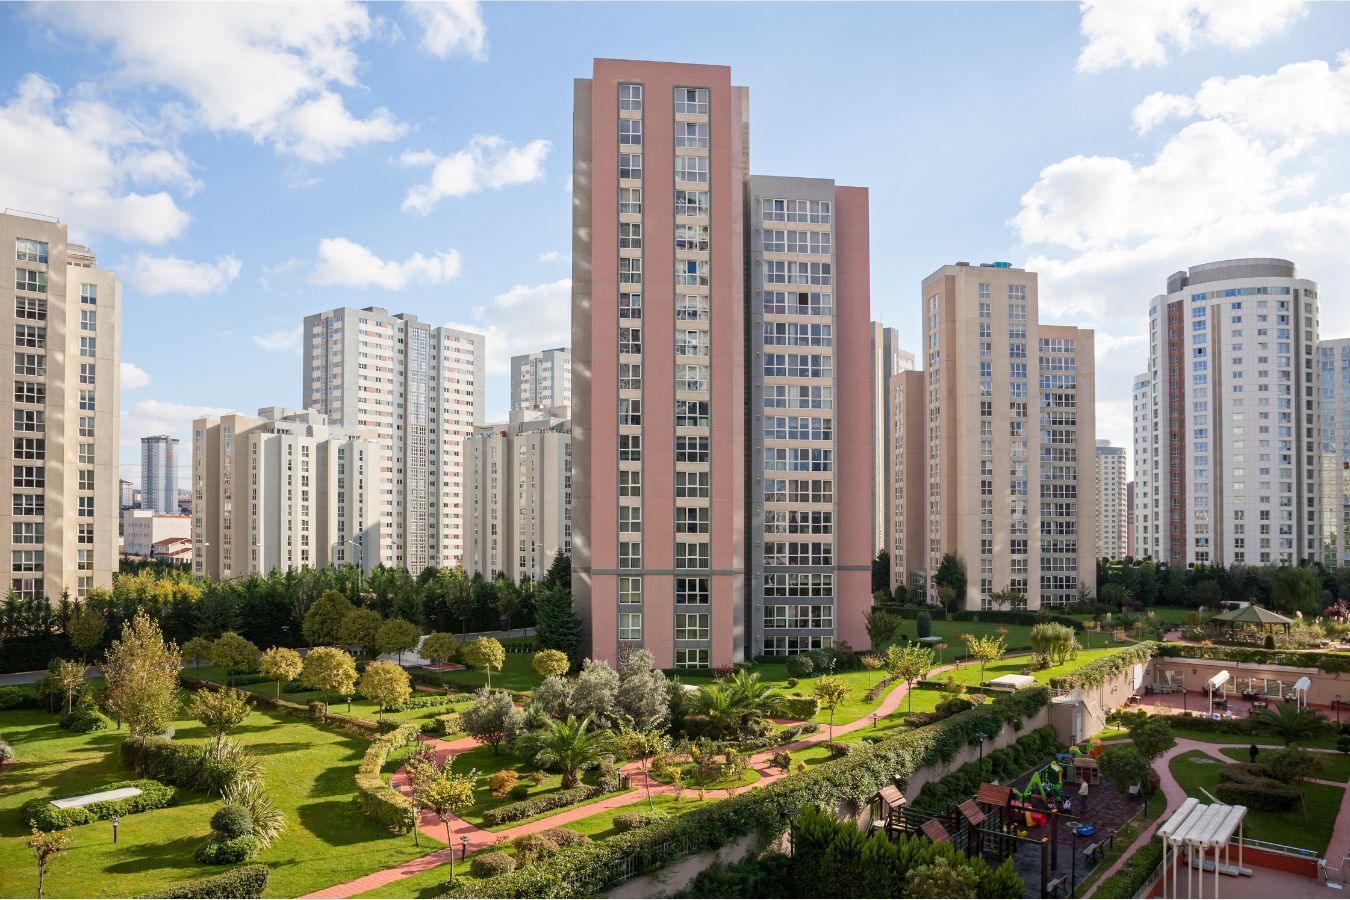 Group of tall building with open spaces and meadows